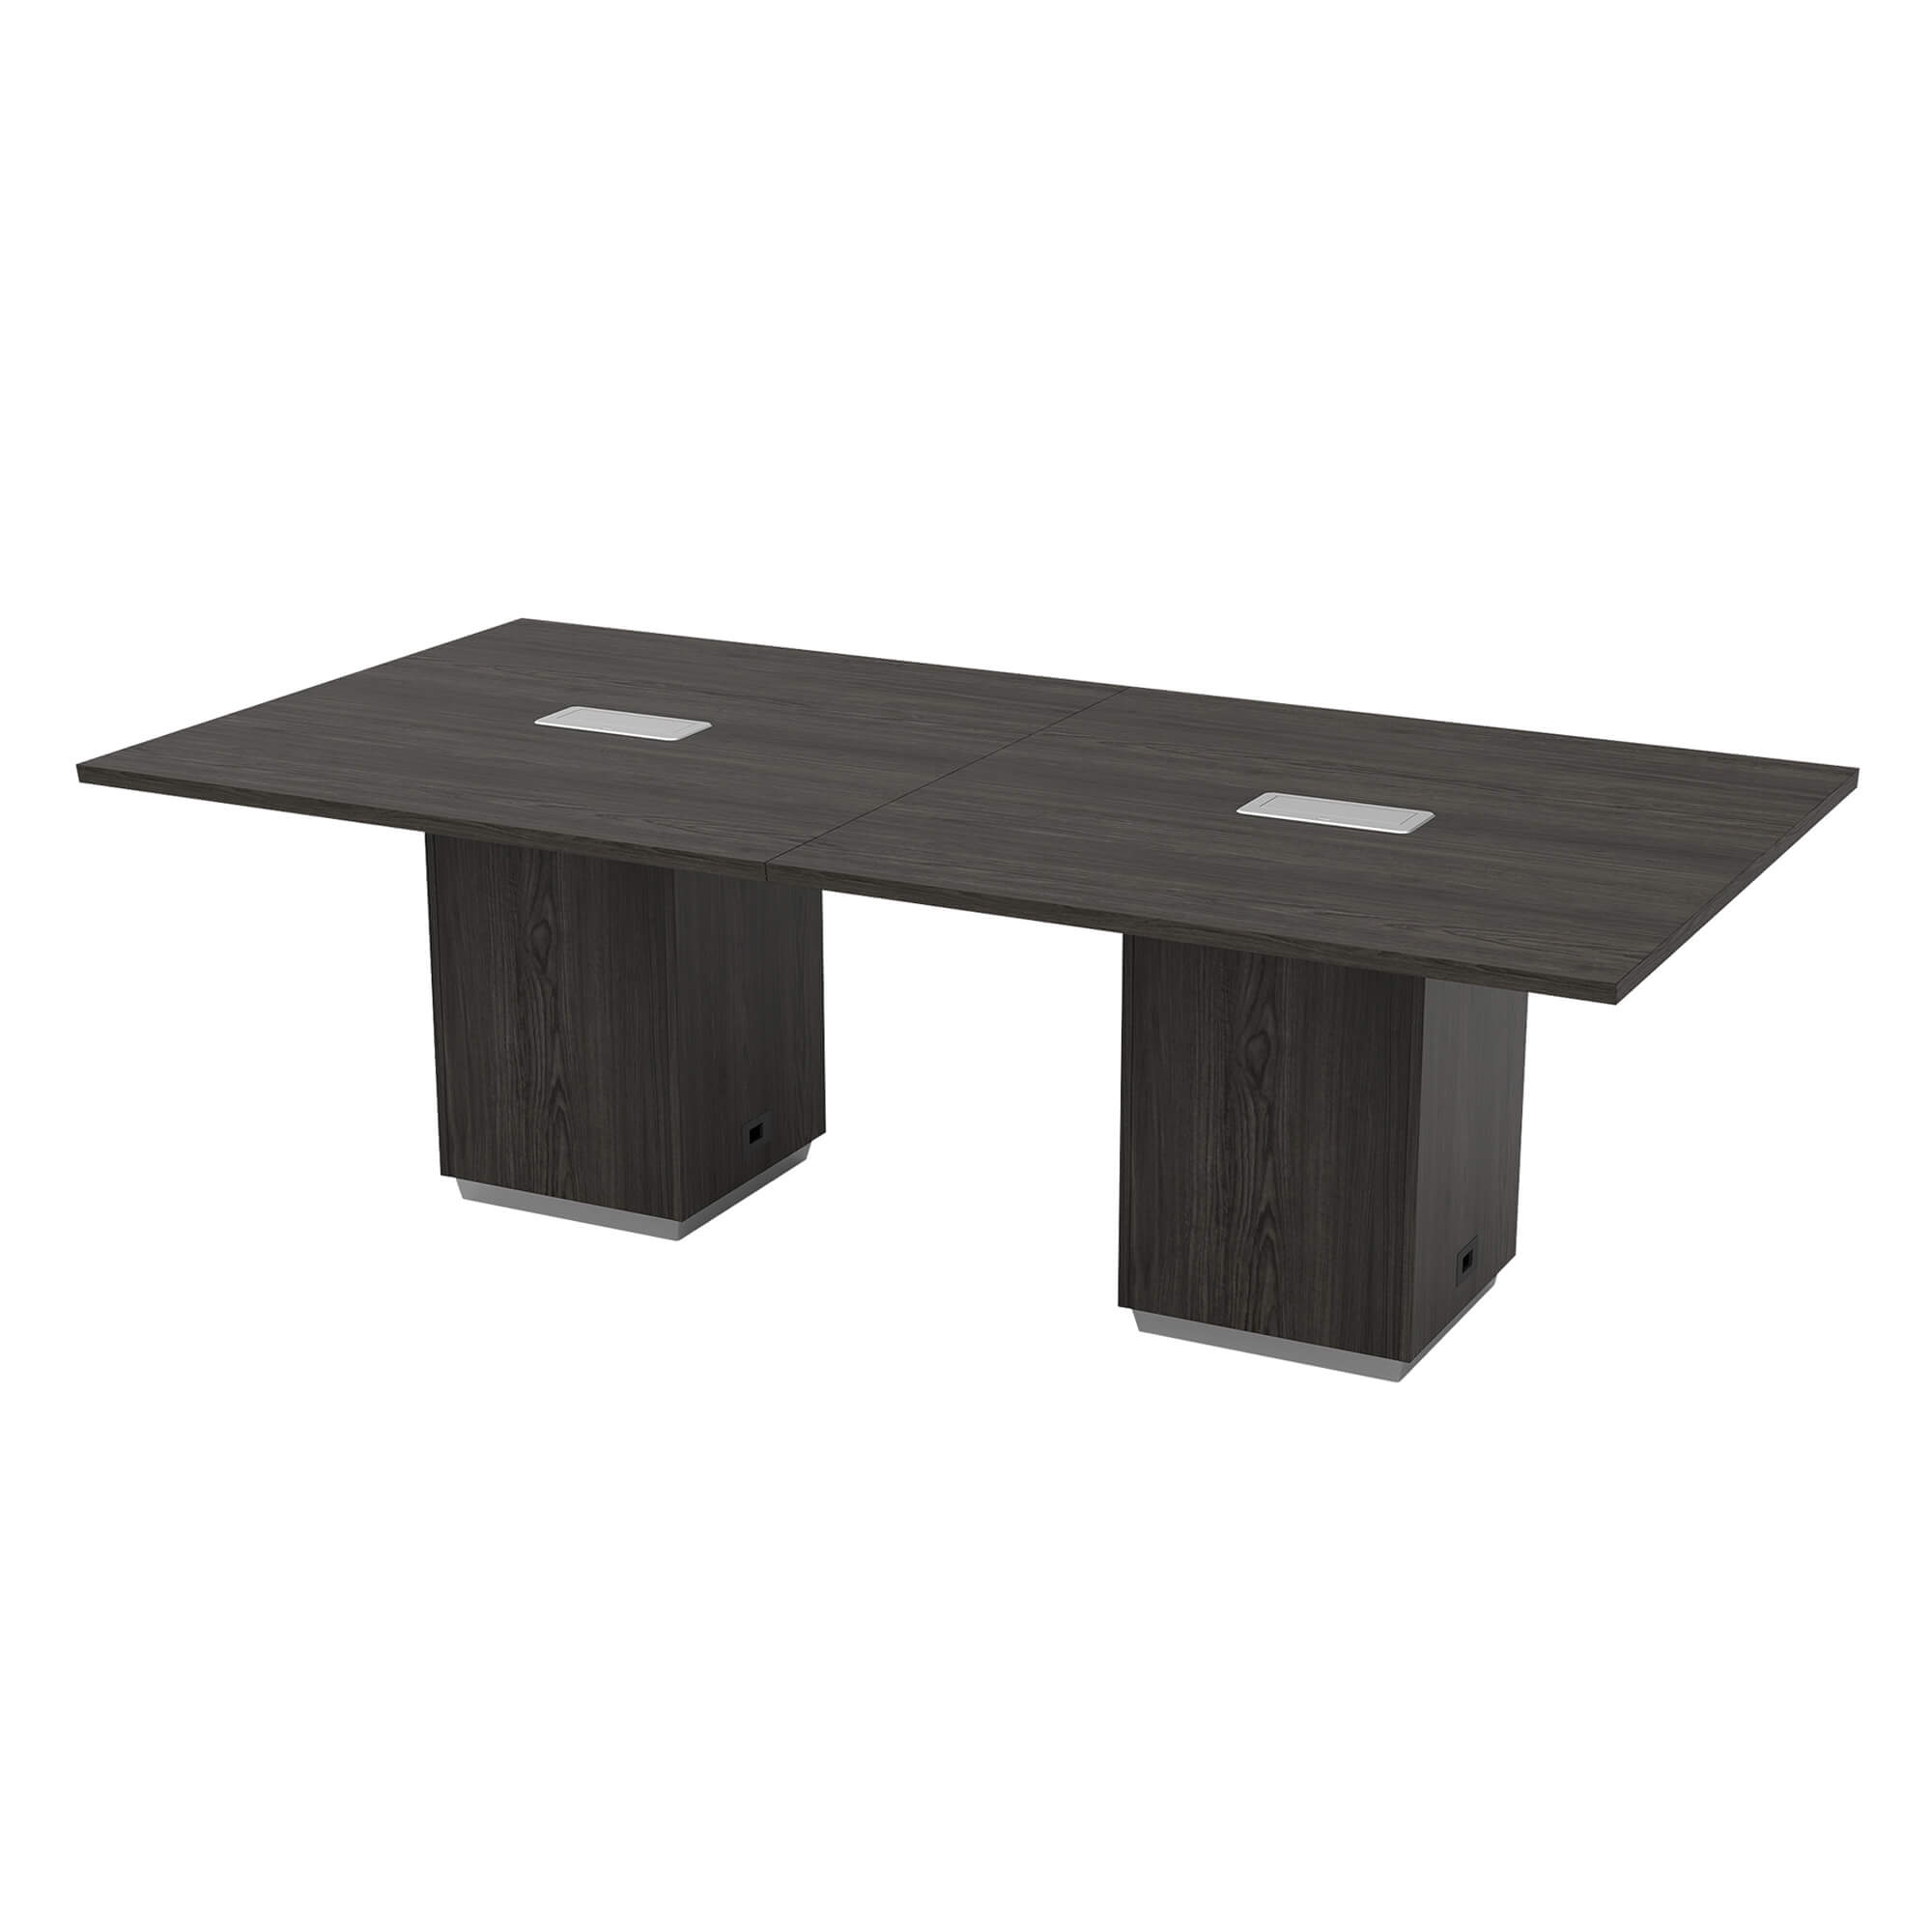 Conference tables CUB TUXSGW 60 PSO